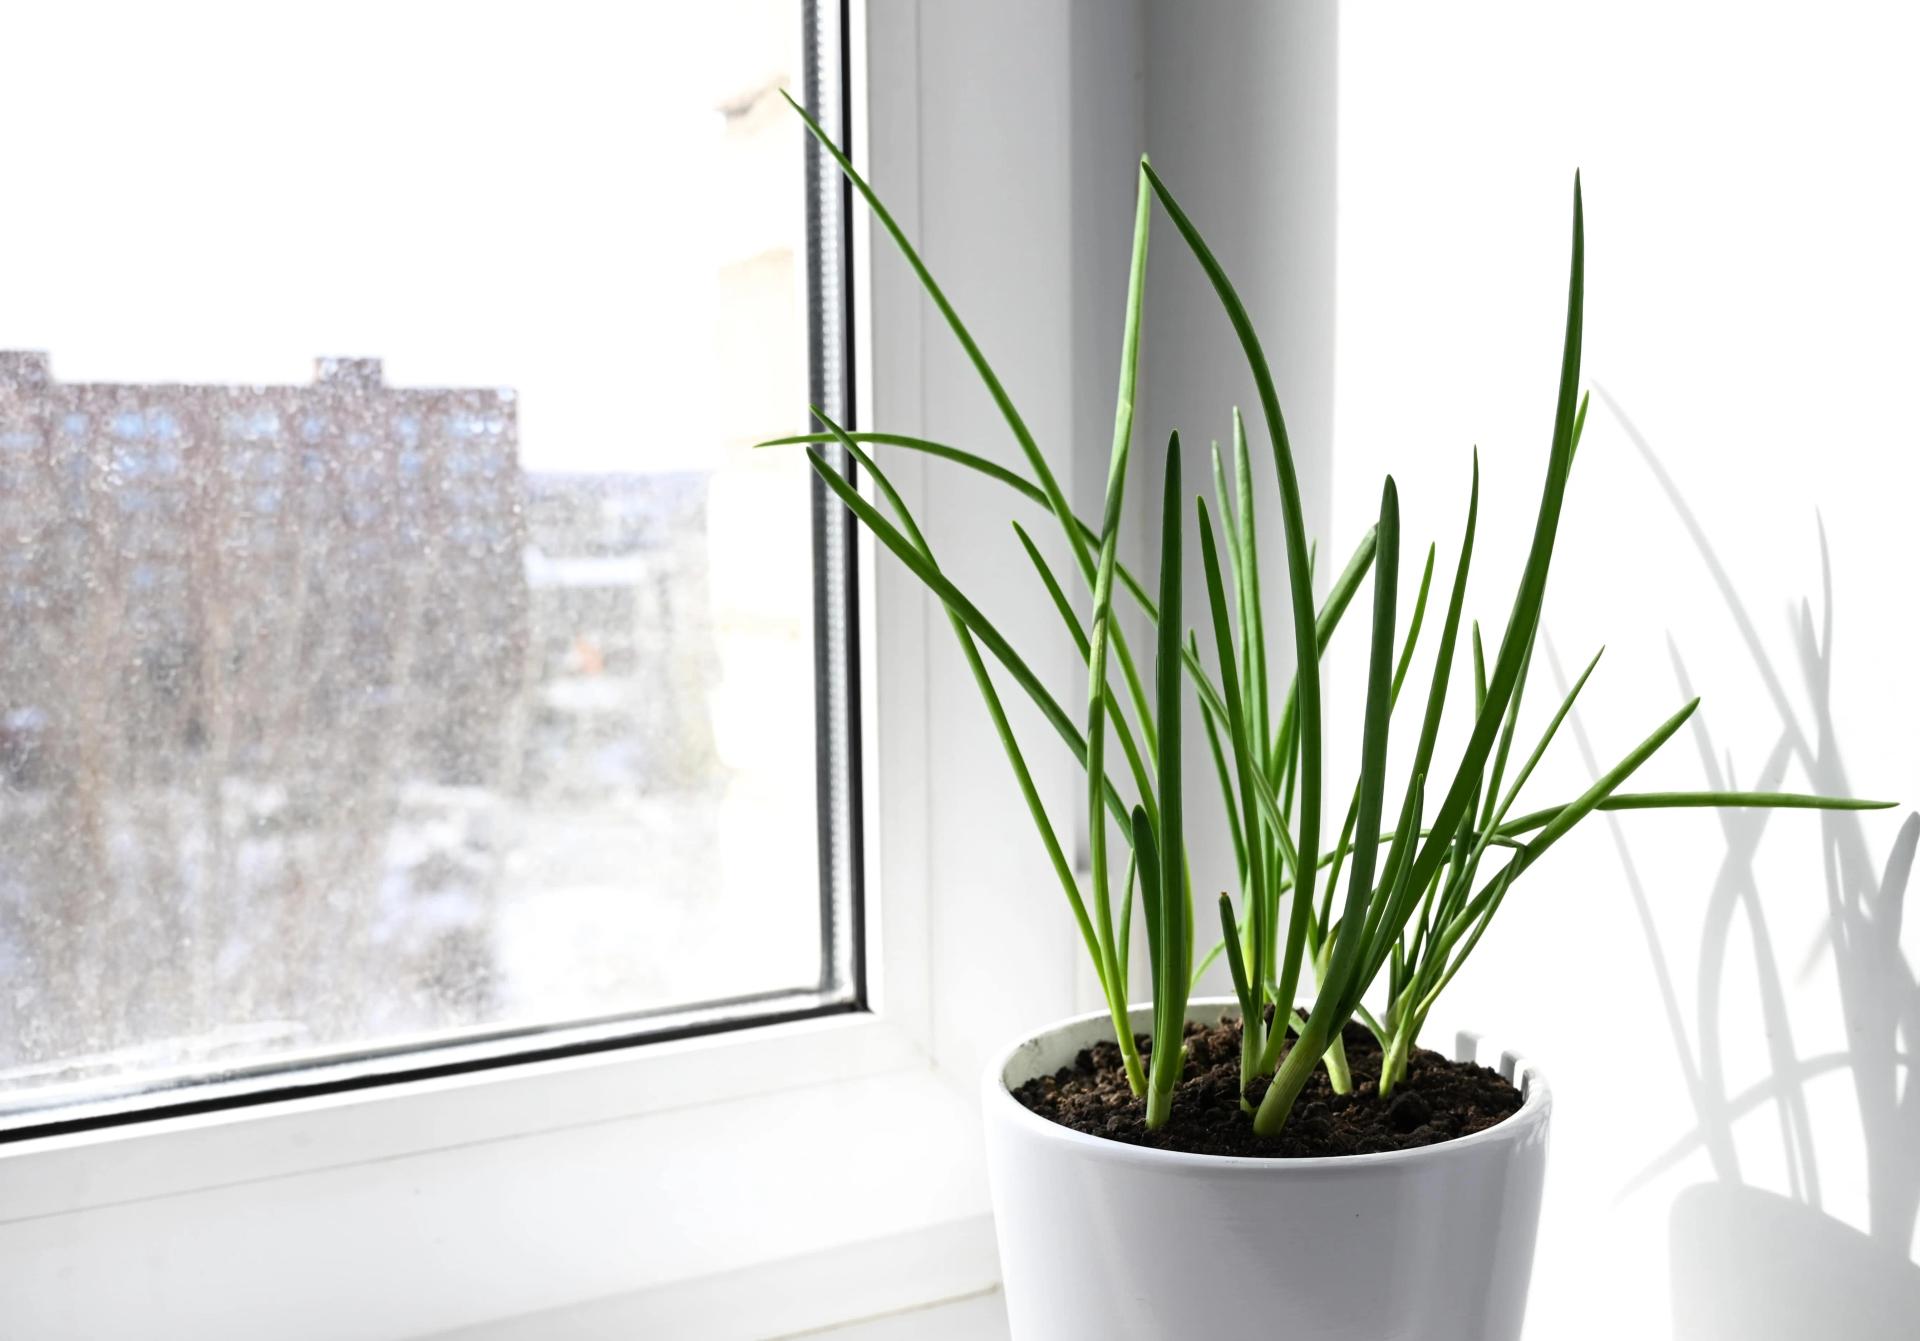 Green Onions Grow in a Pot Indoors